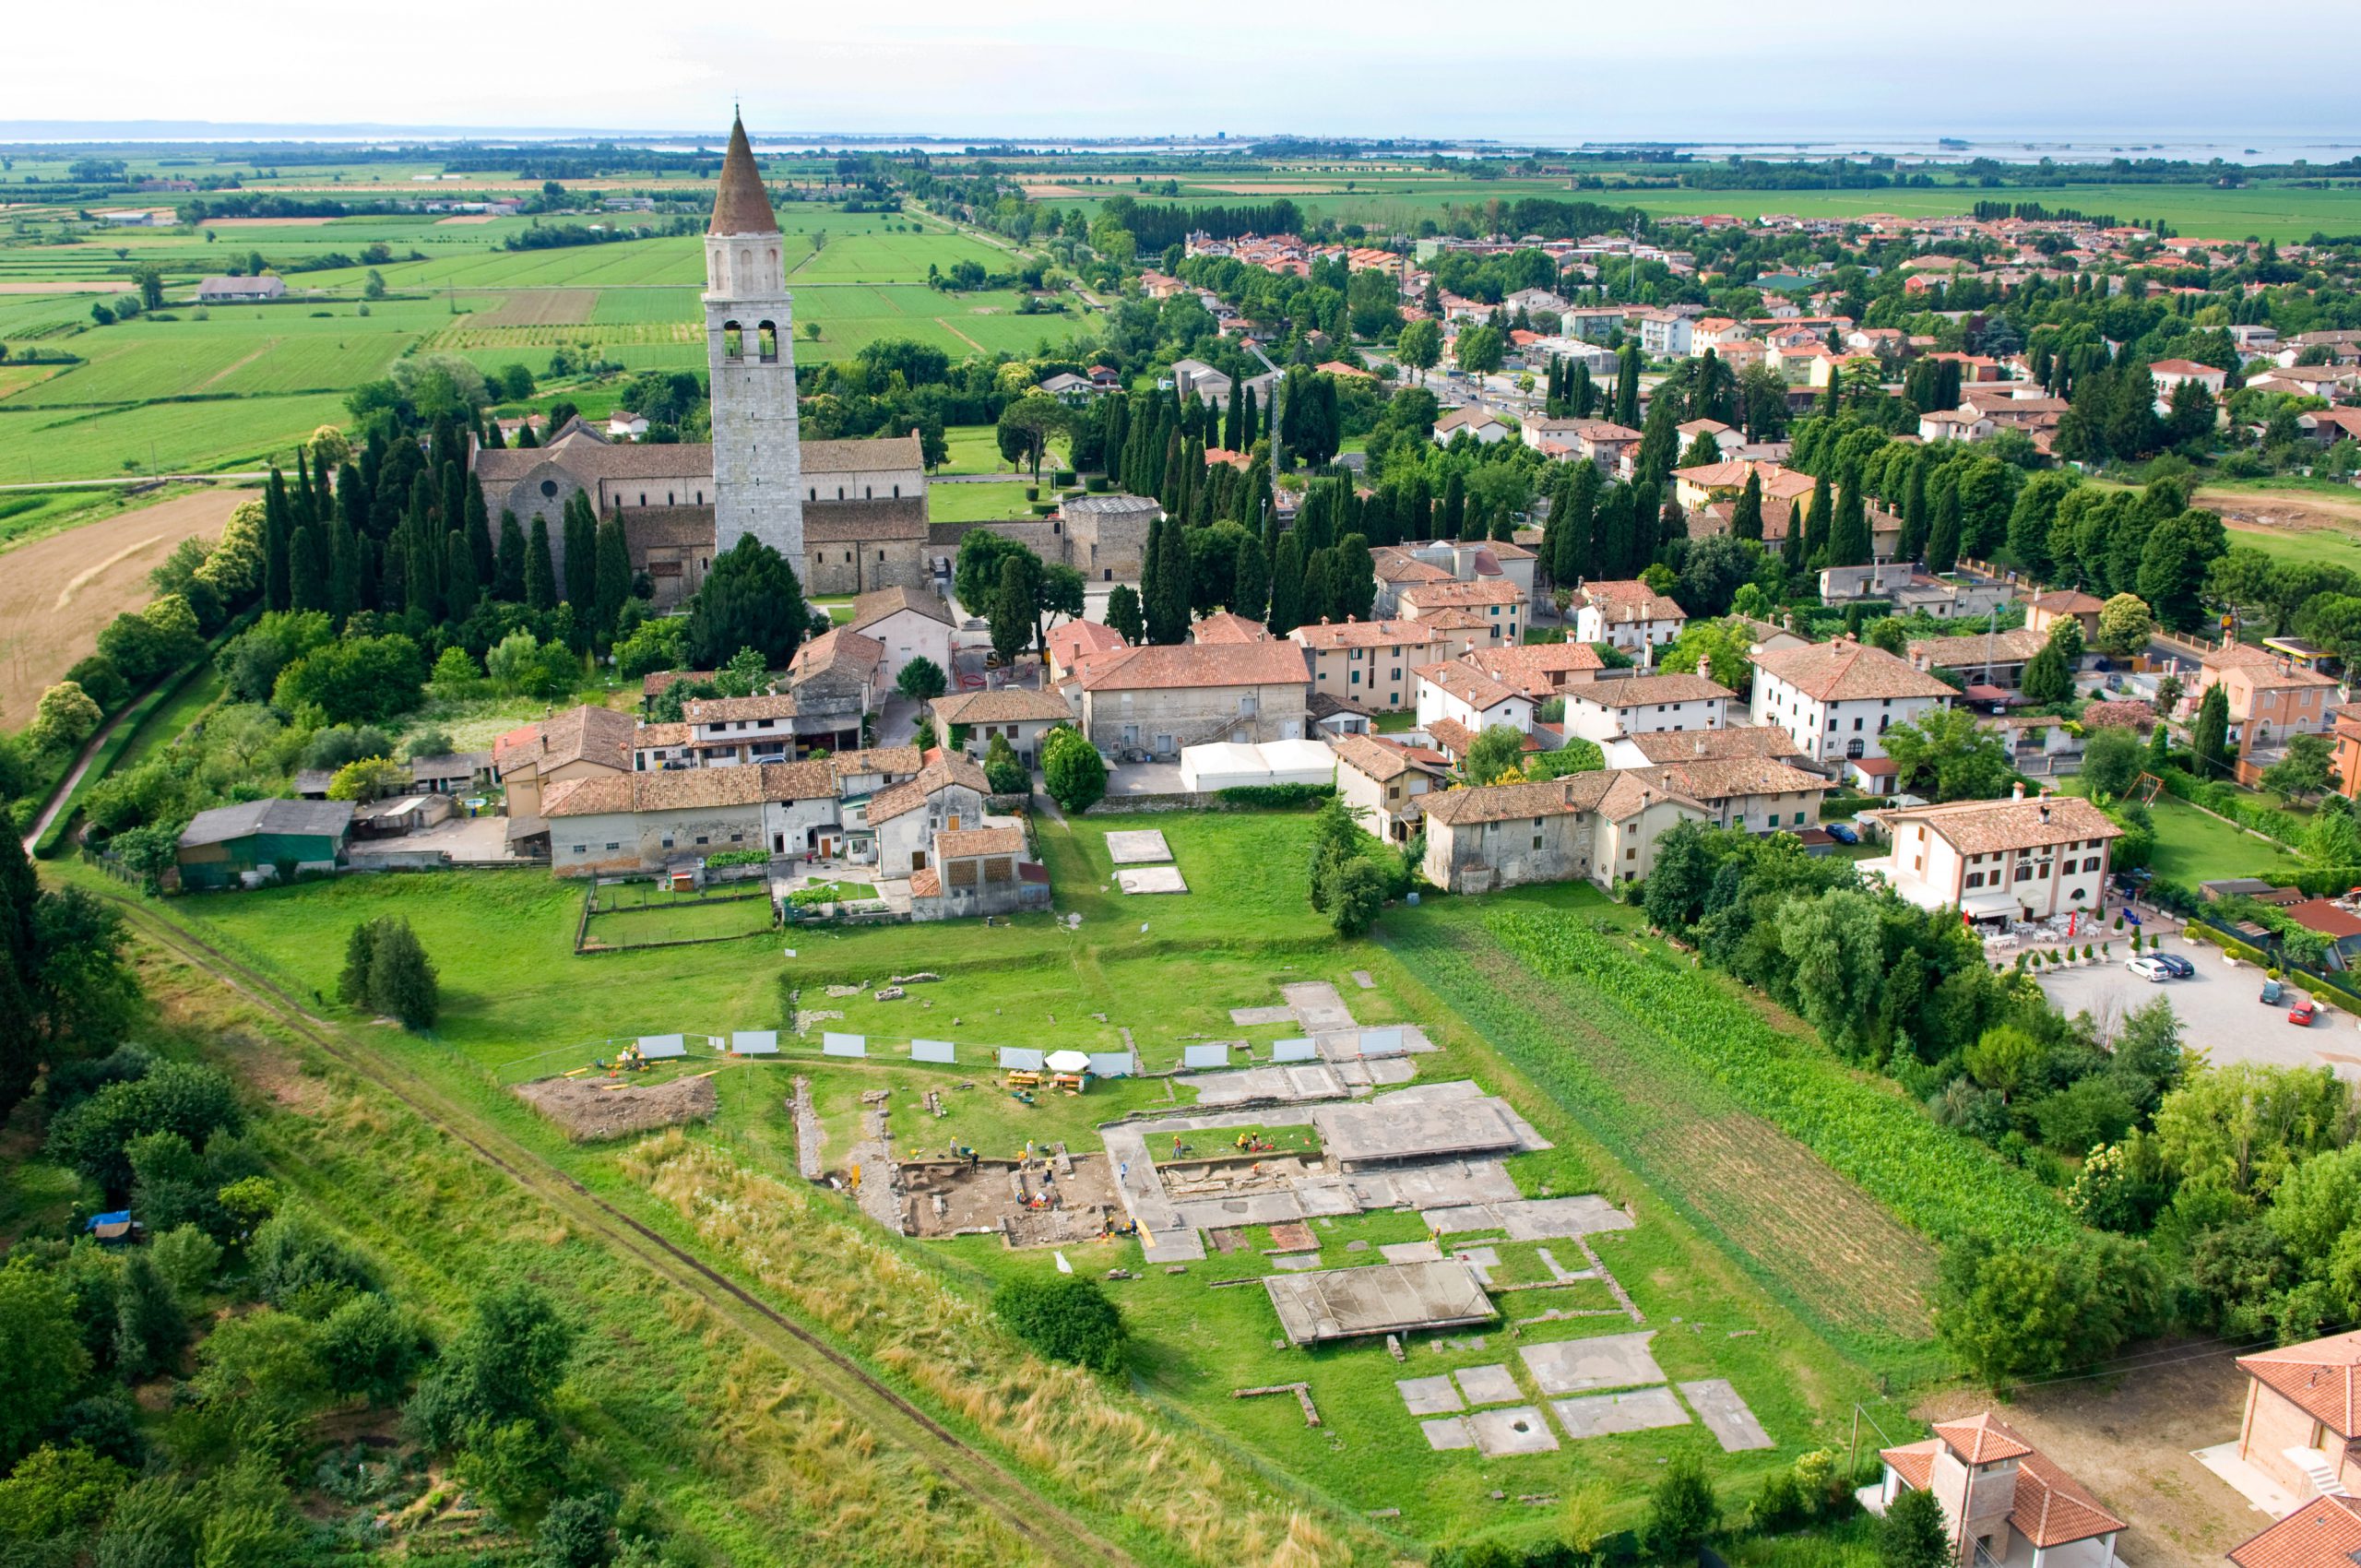 Cycling and culture combined - visit the traces of the Romans in Aquileia, the "second Rome"